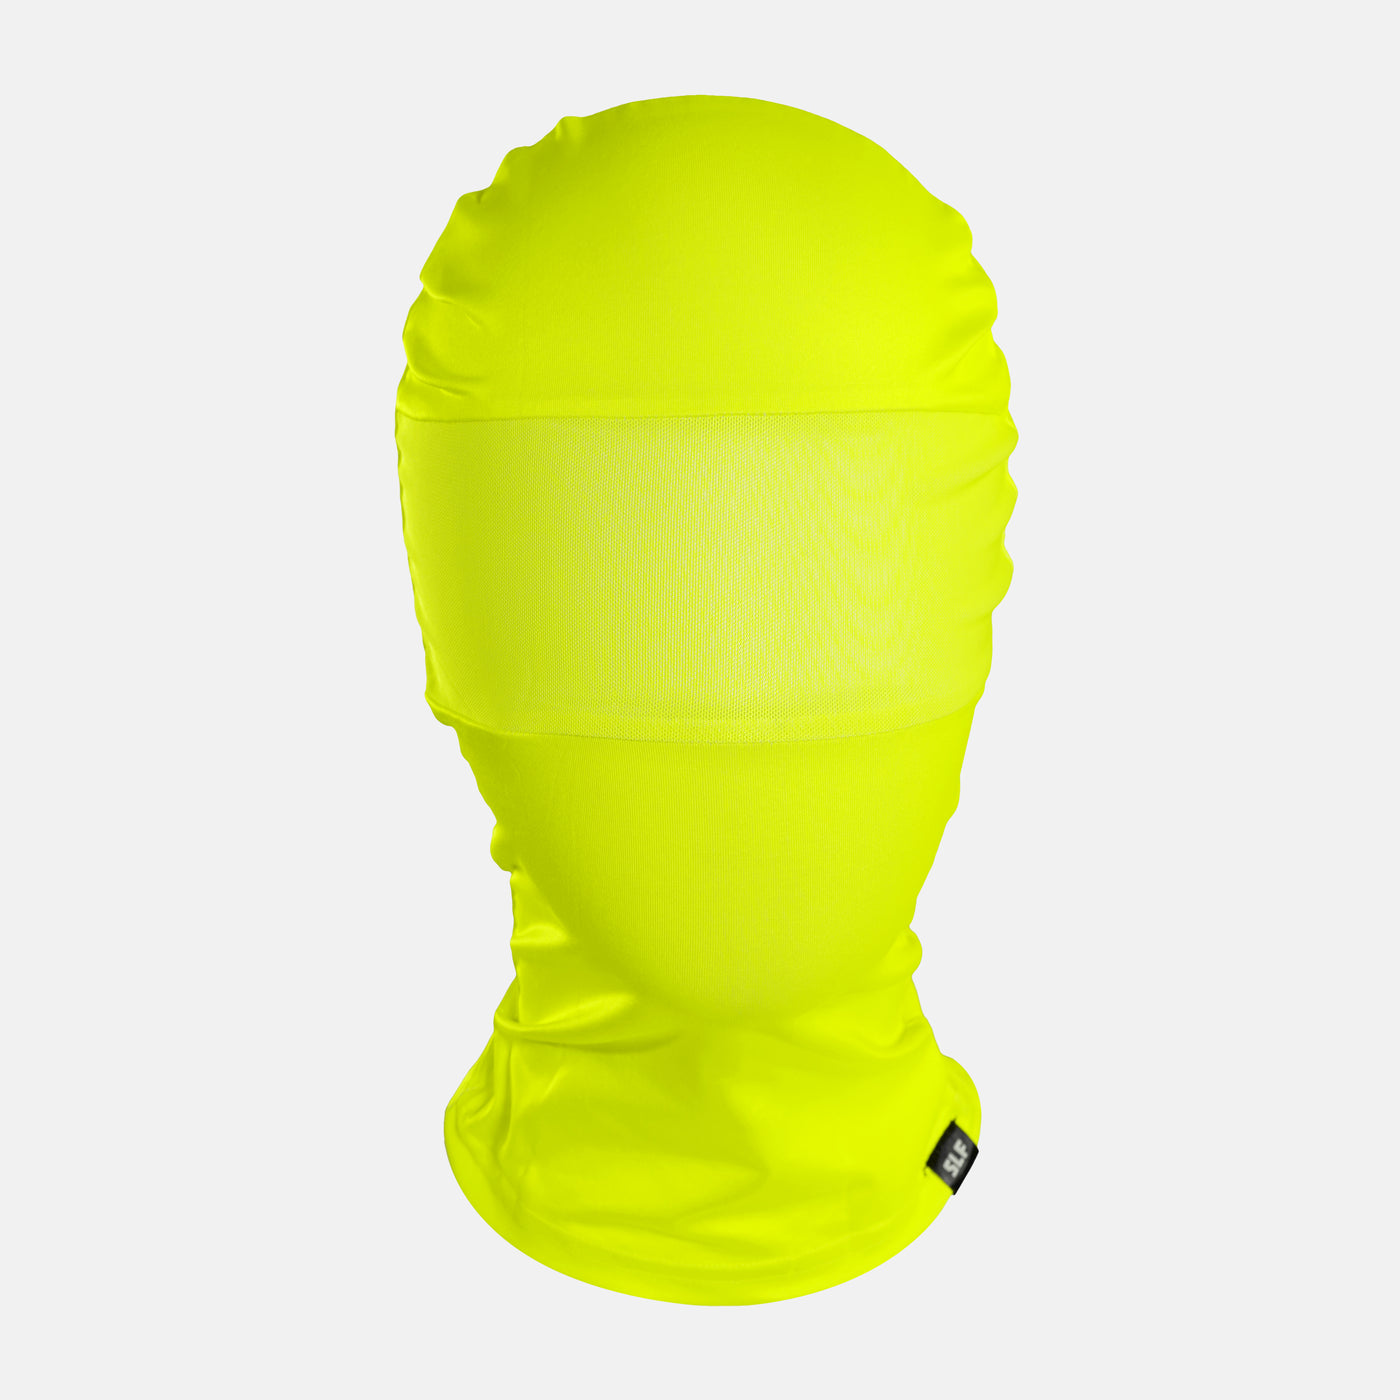 Safety Yellow Head Bag Mask